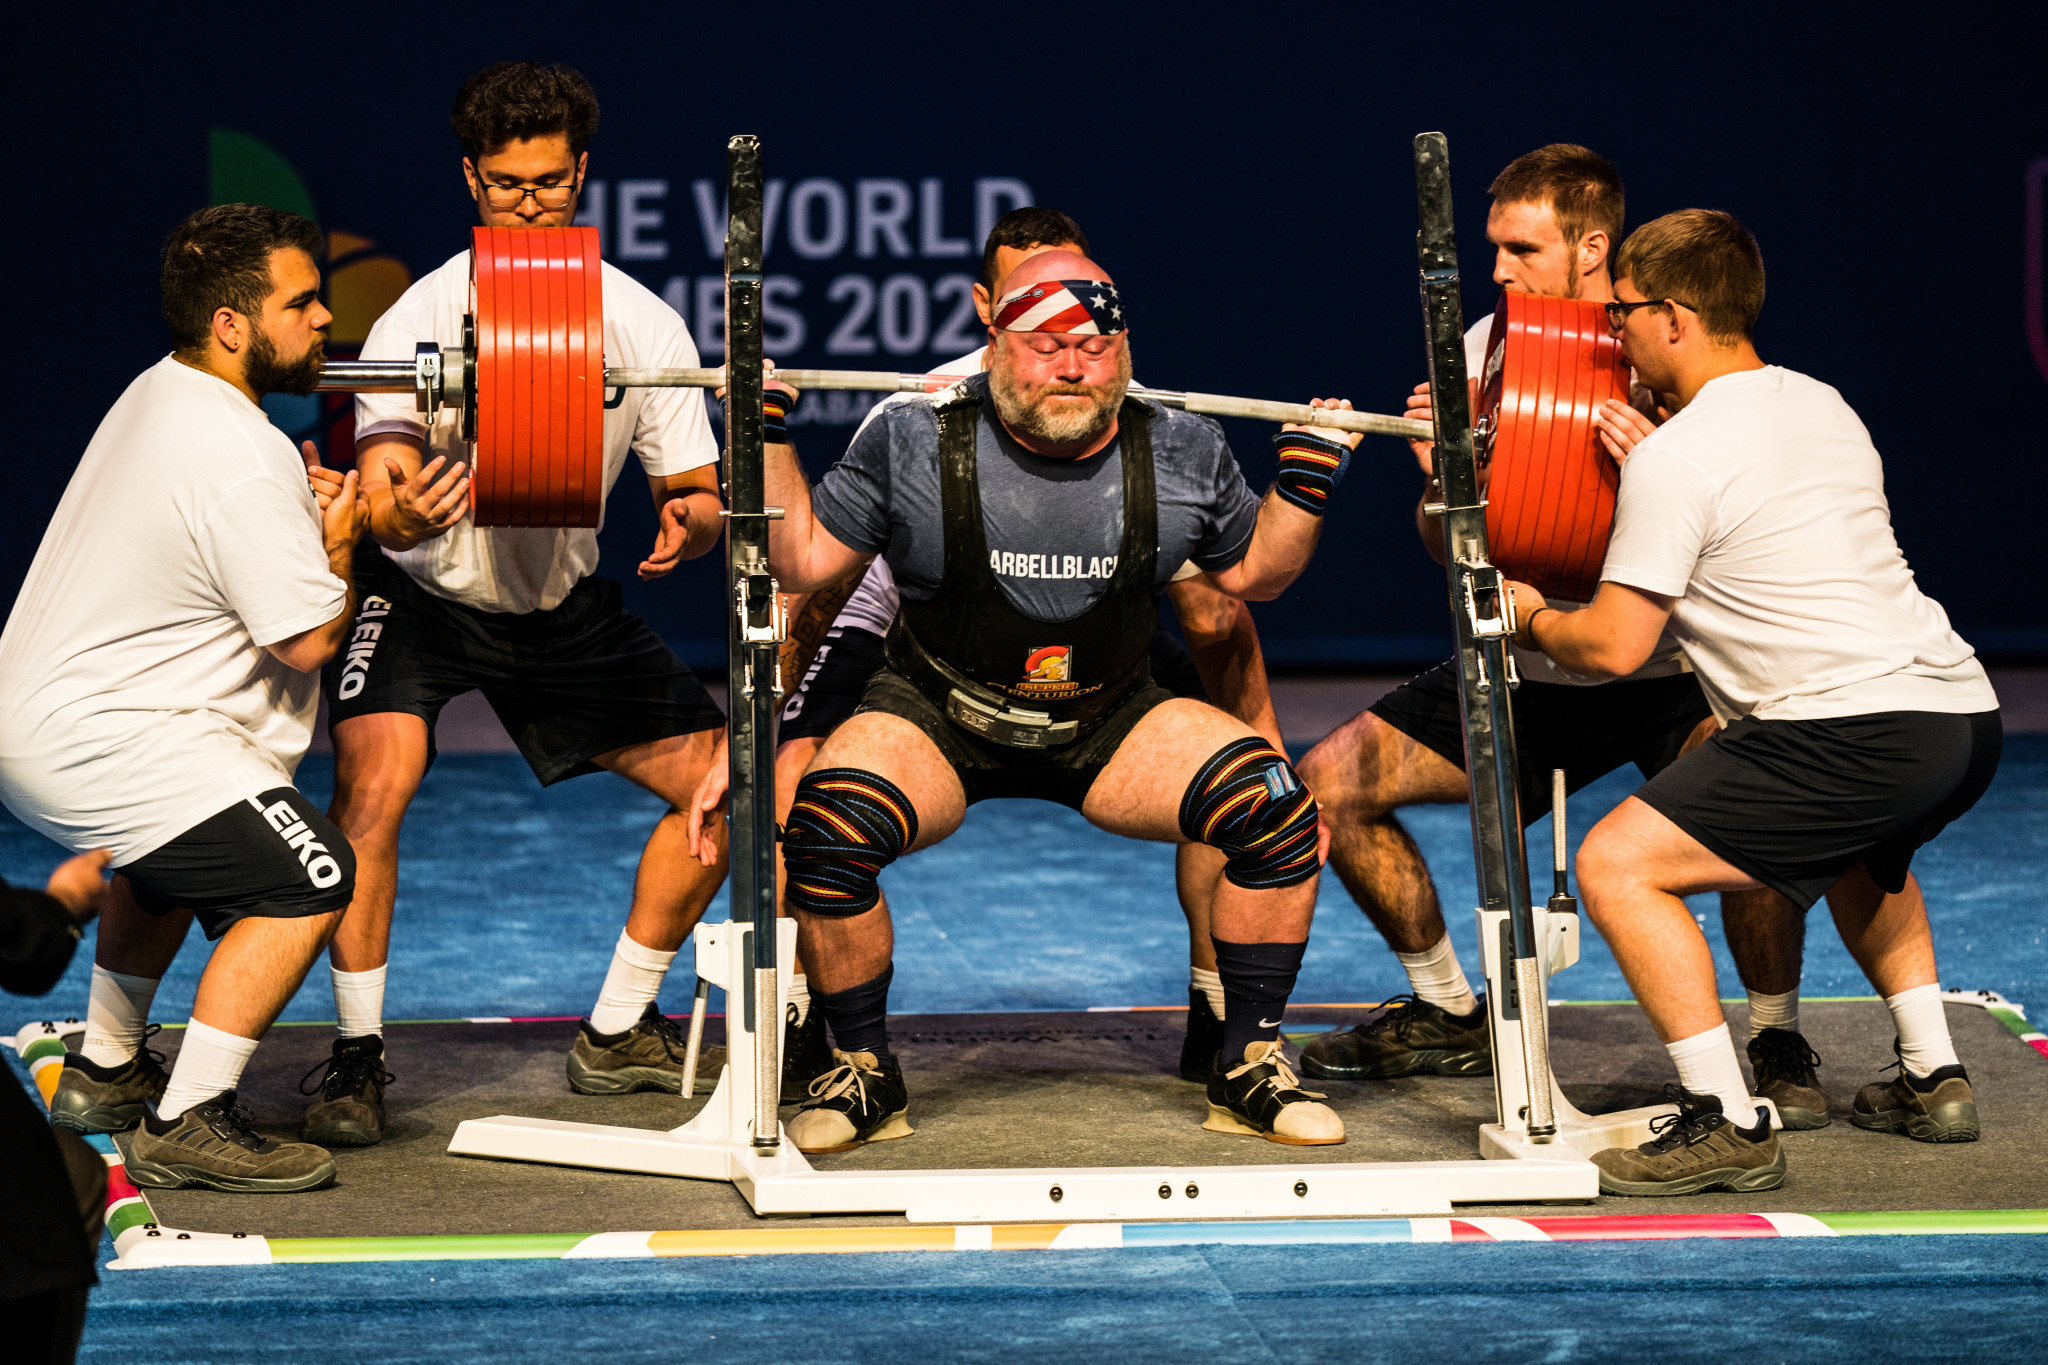 Officials were forced to step in to help a powerlifter ©The World Games